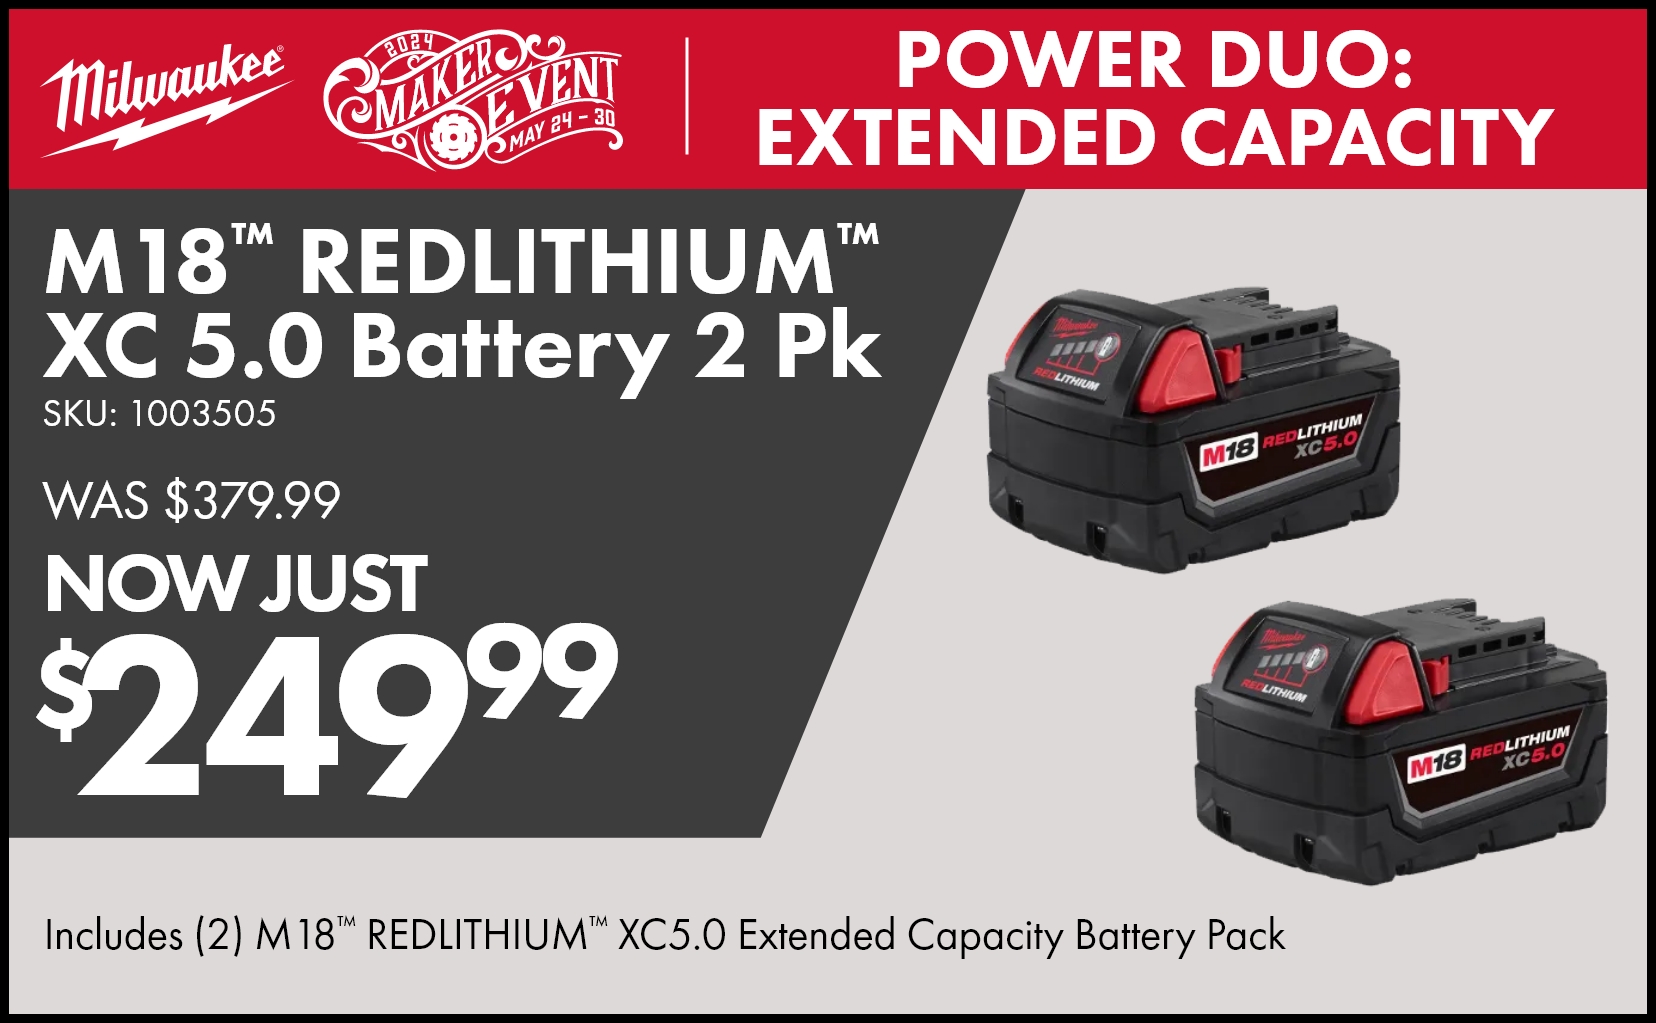 Shop the Milwaukee® M18™ REDLITHIUM™ 18 Volt Lithium-Ion XC5.0 Amp Extended Capacity Battery Two Pack